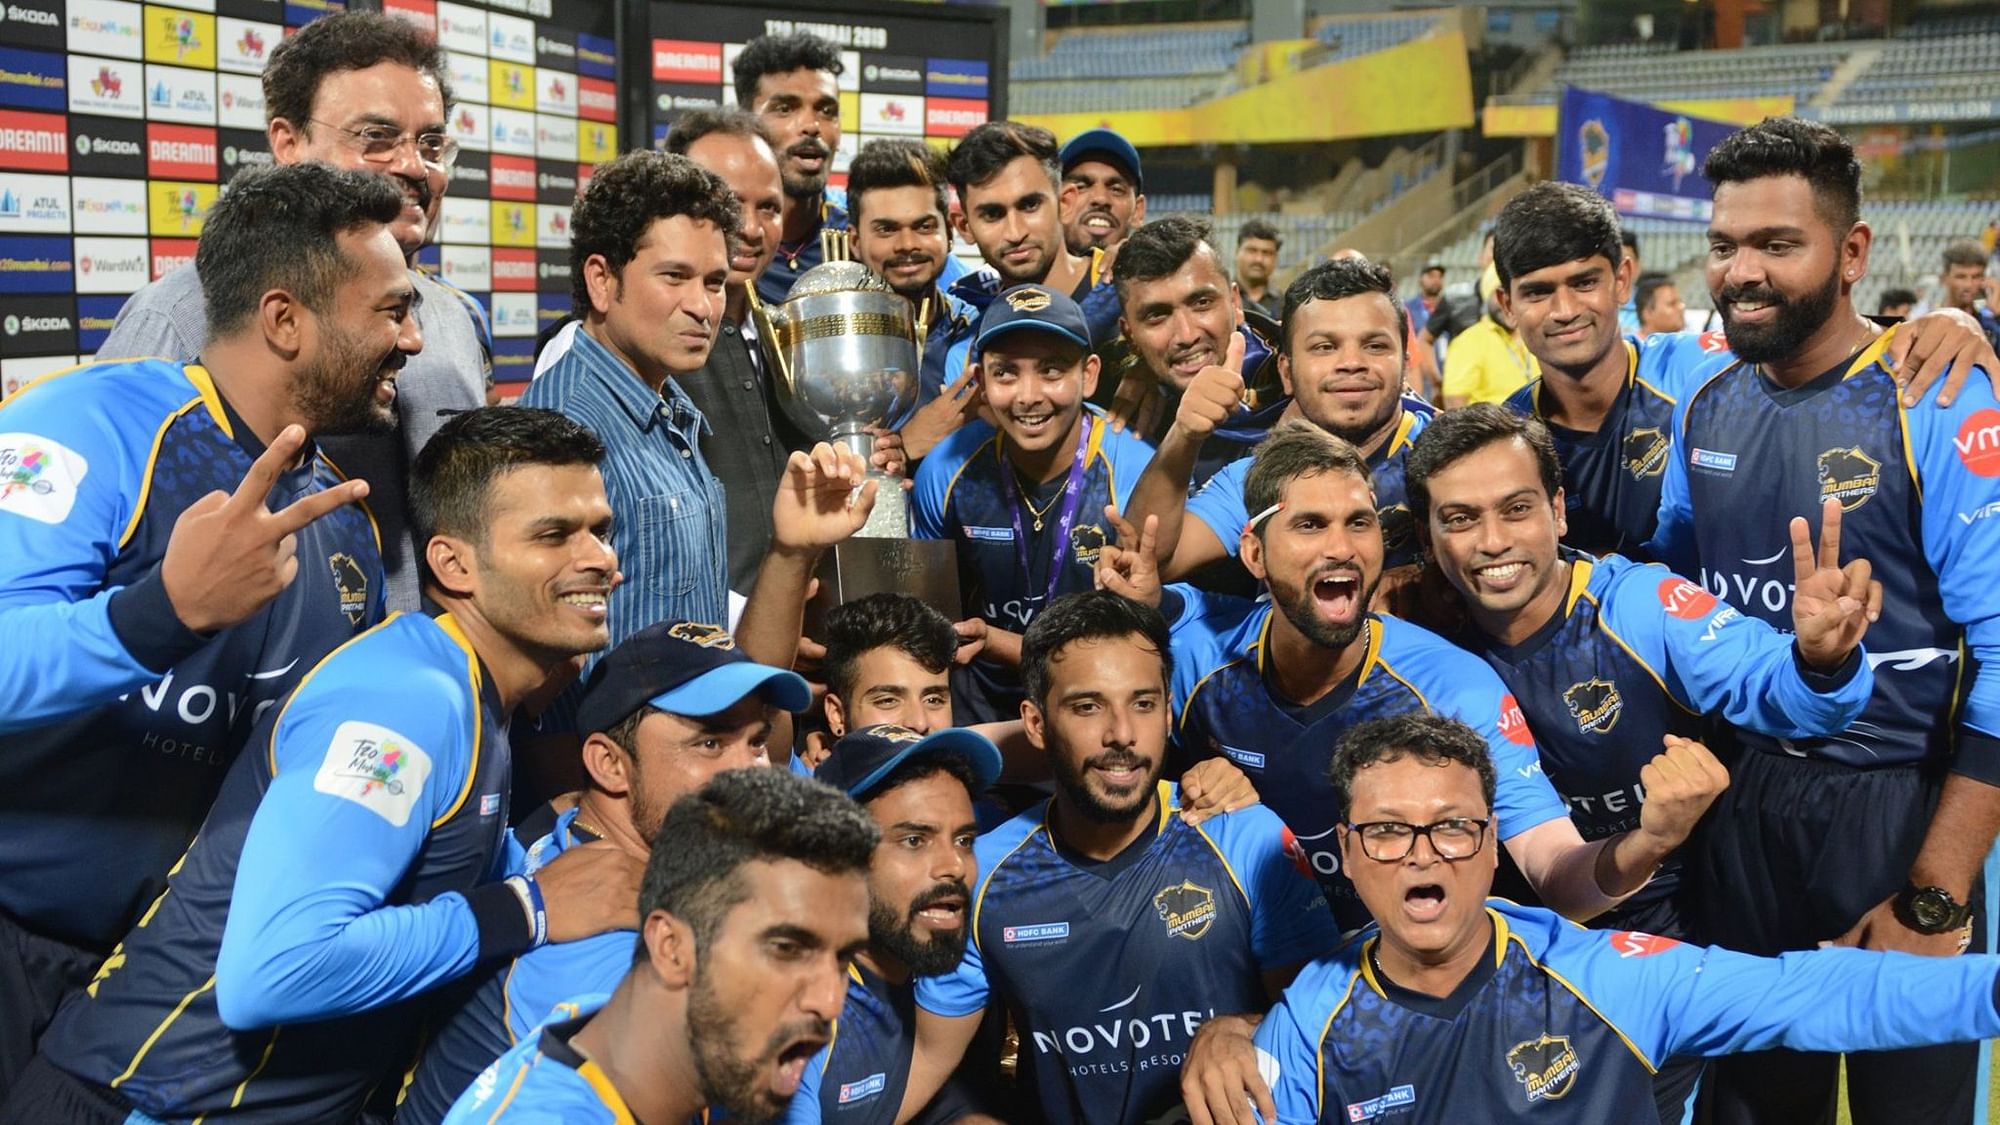 North Mumbai Panthers were crowned champions of the second edition of the T20 Mumbai league.